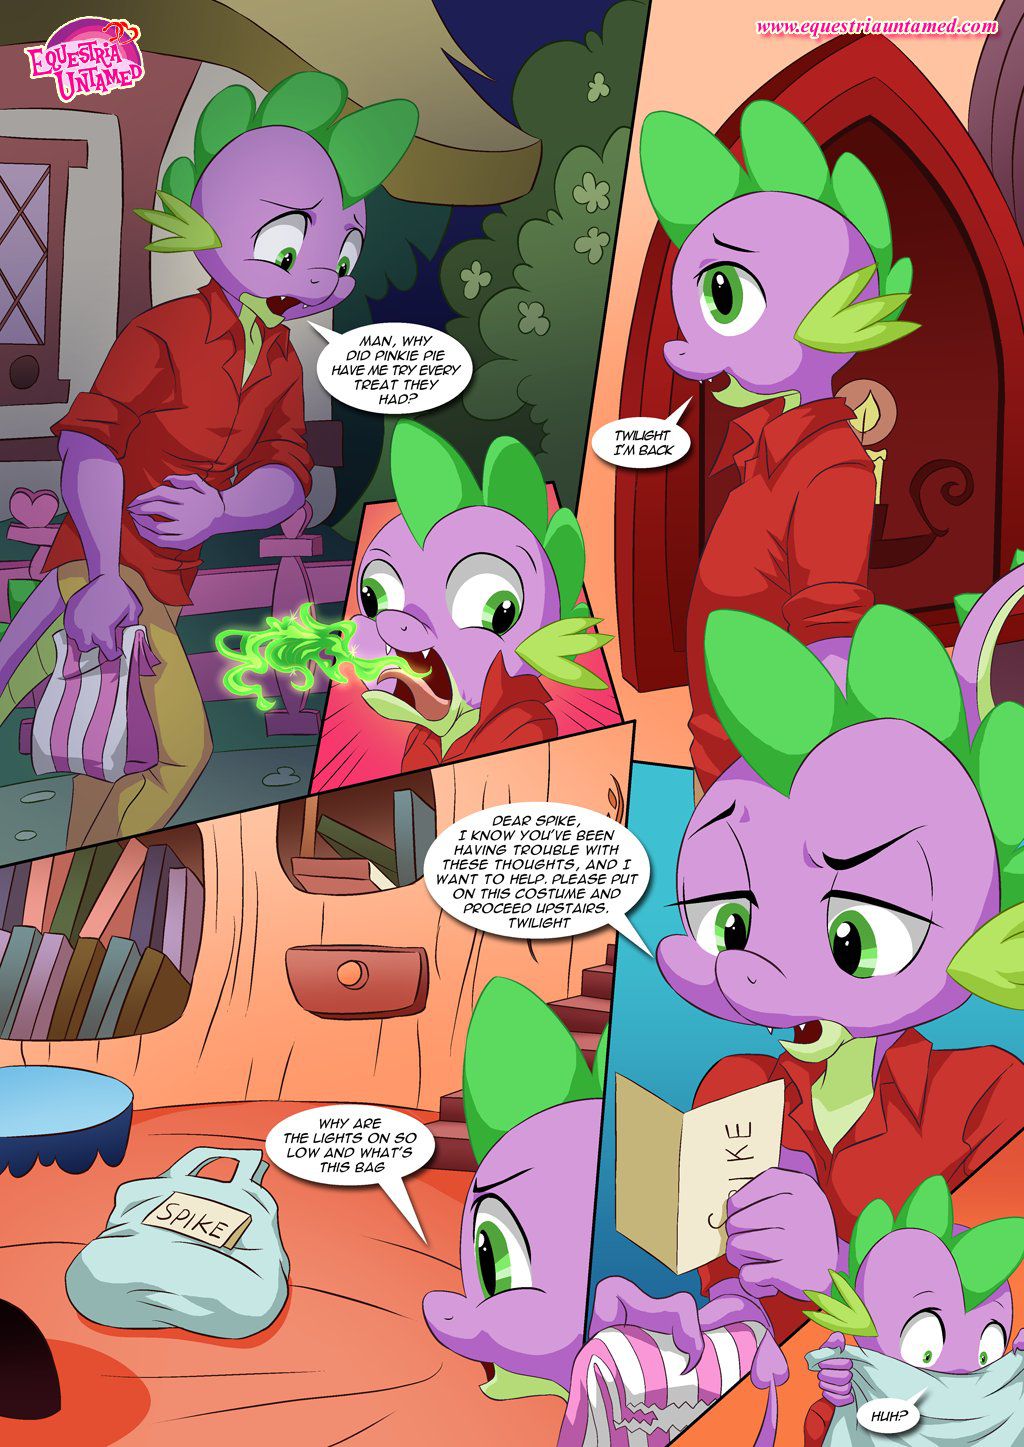 [Palcomix] Sex Ed with Miss Twilight Sparkle (My Little Pony Friendship Is Magic) [Ongoing] 14